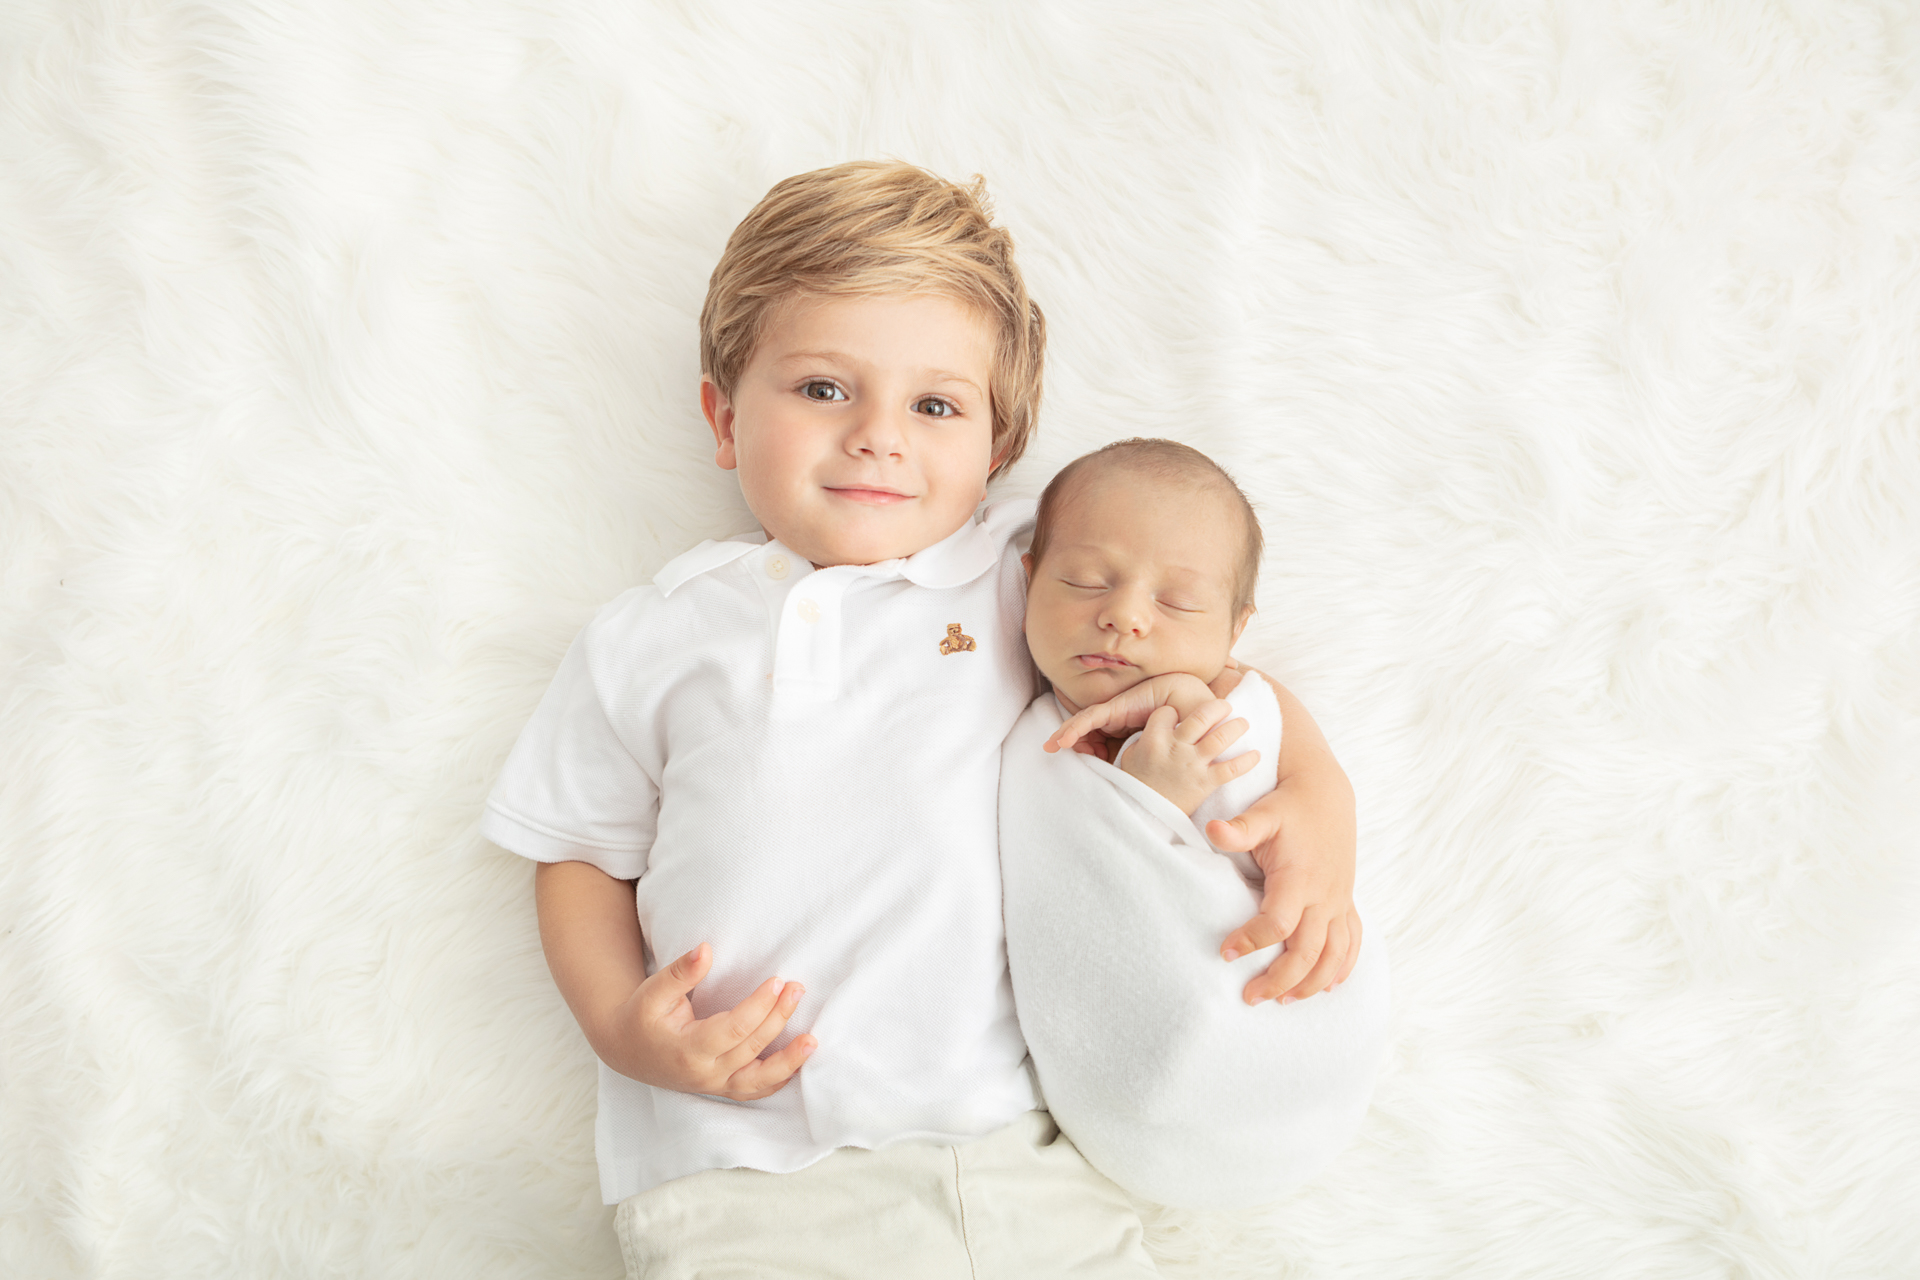 proud toddler brother with his arm around his new baby brother